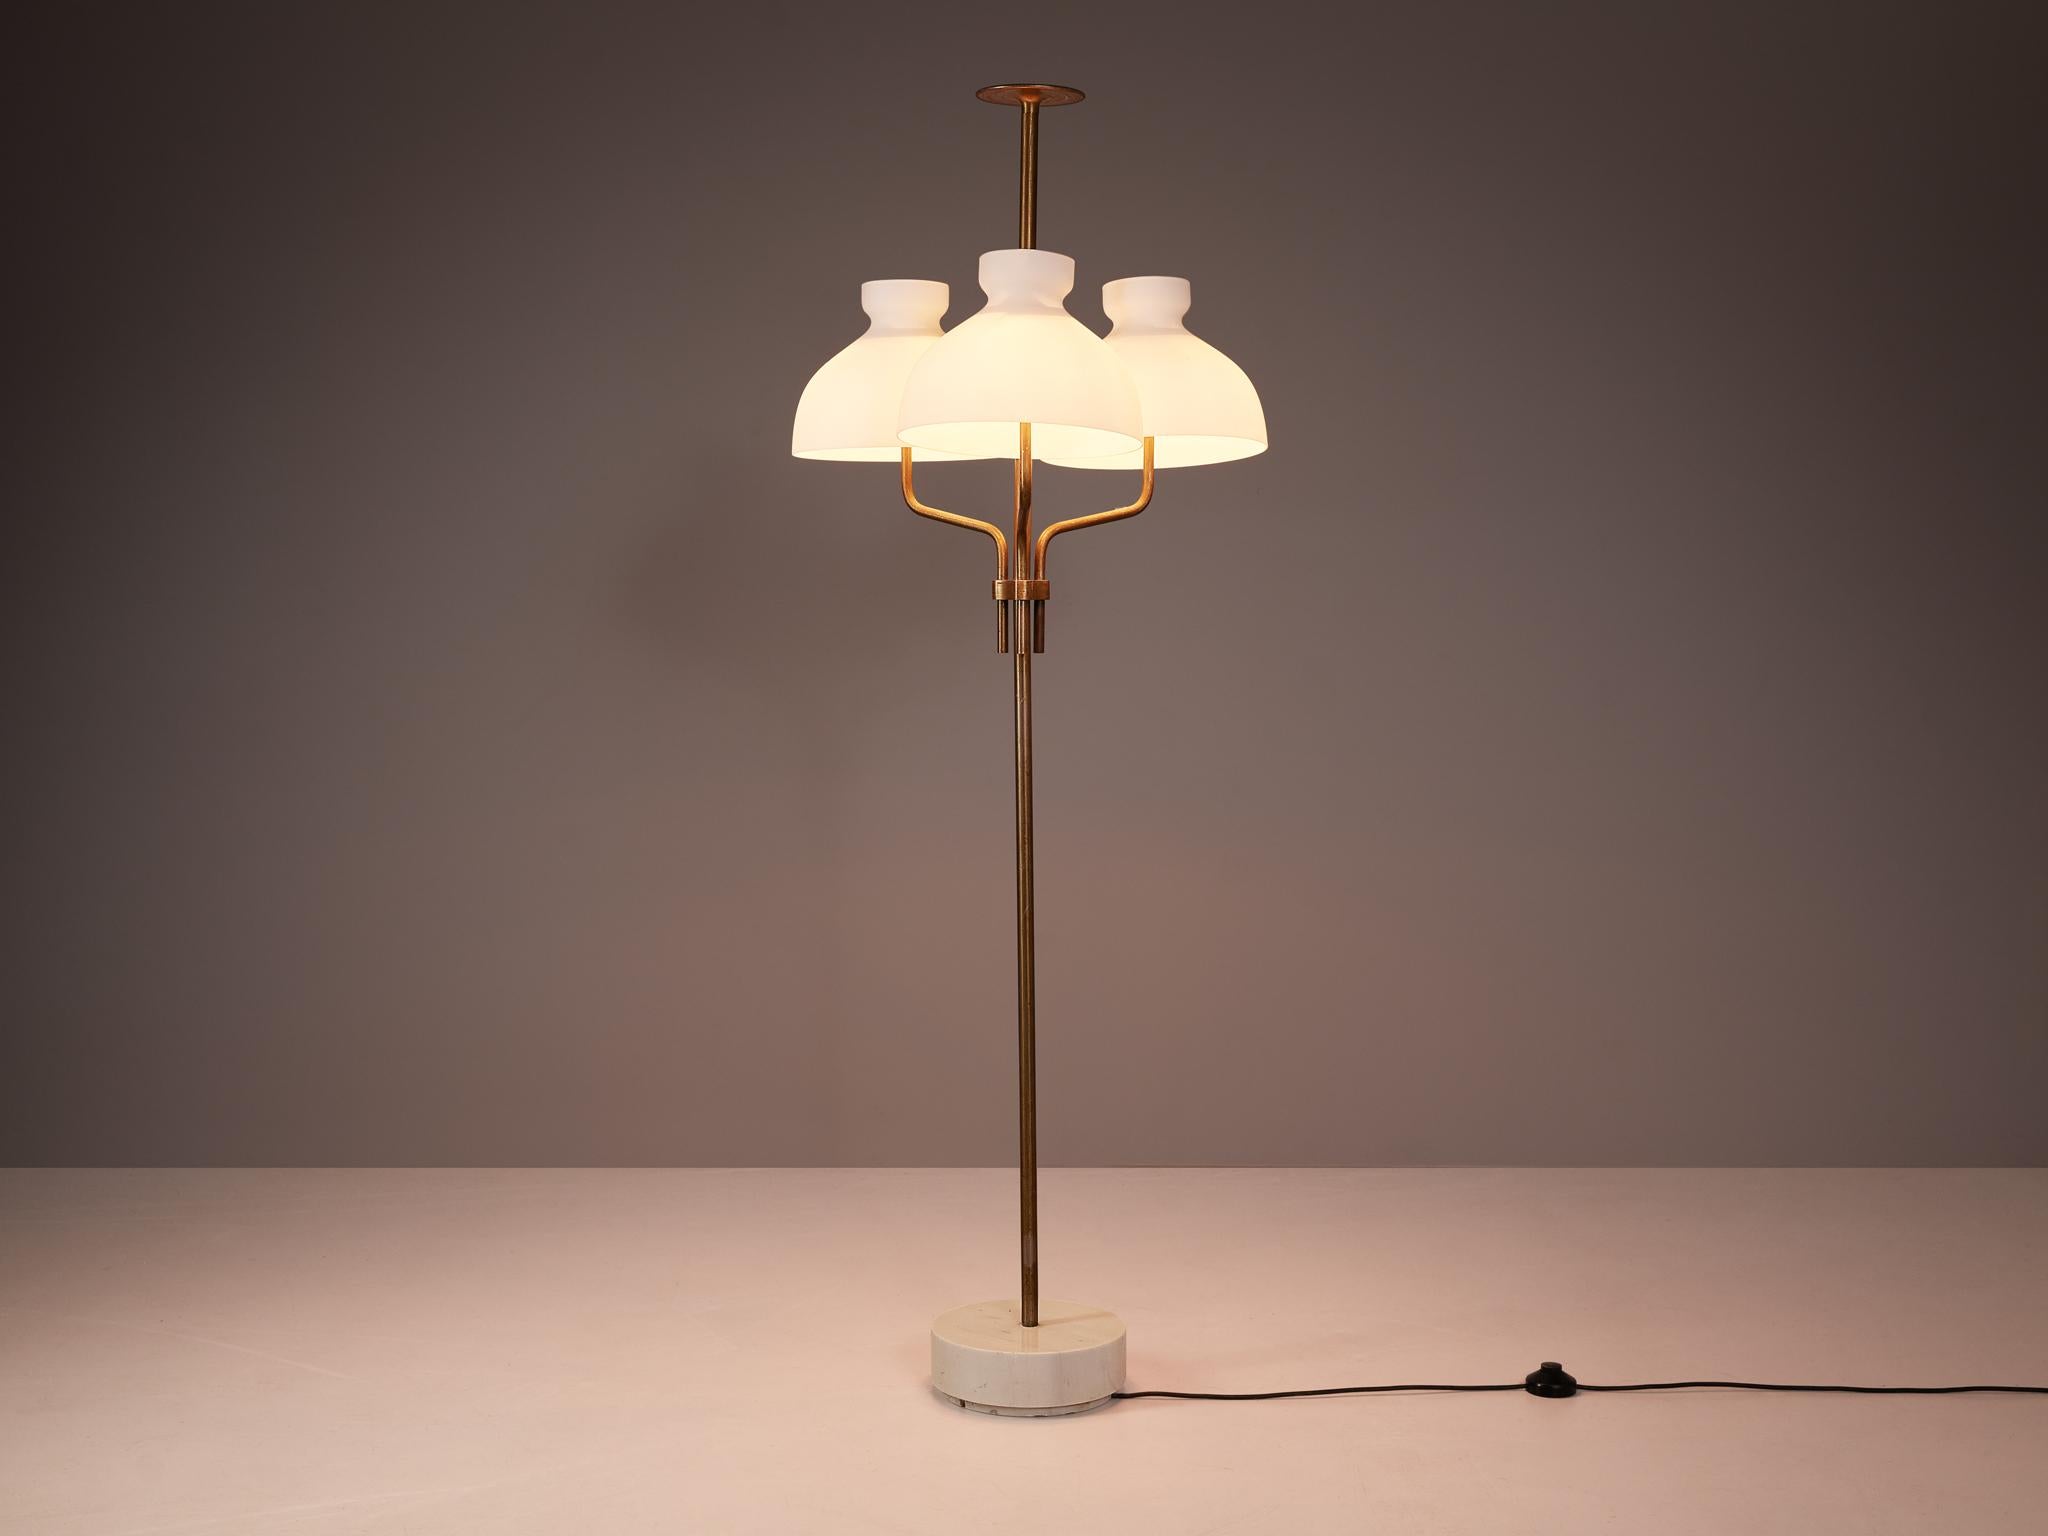 Ignazio Gardella for Azucena, floor lamp 'Arenzano', brass, Carrara marble, opaline glass, Italy, circa 1956

This delightful floor lamp is a design by Ignazio Gardella for Azucena around 1956.  Its graceful stem is crafted from three gracefully